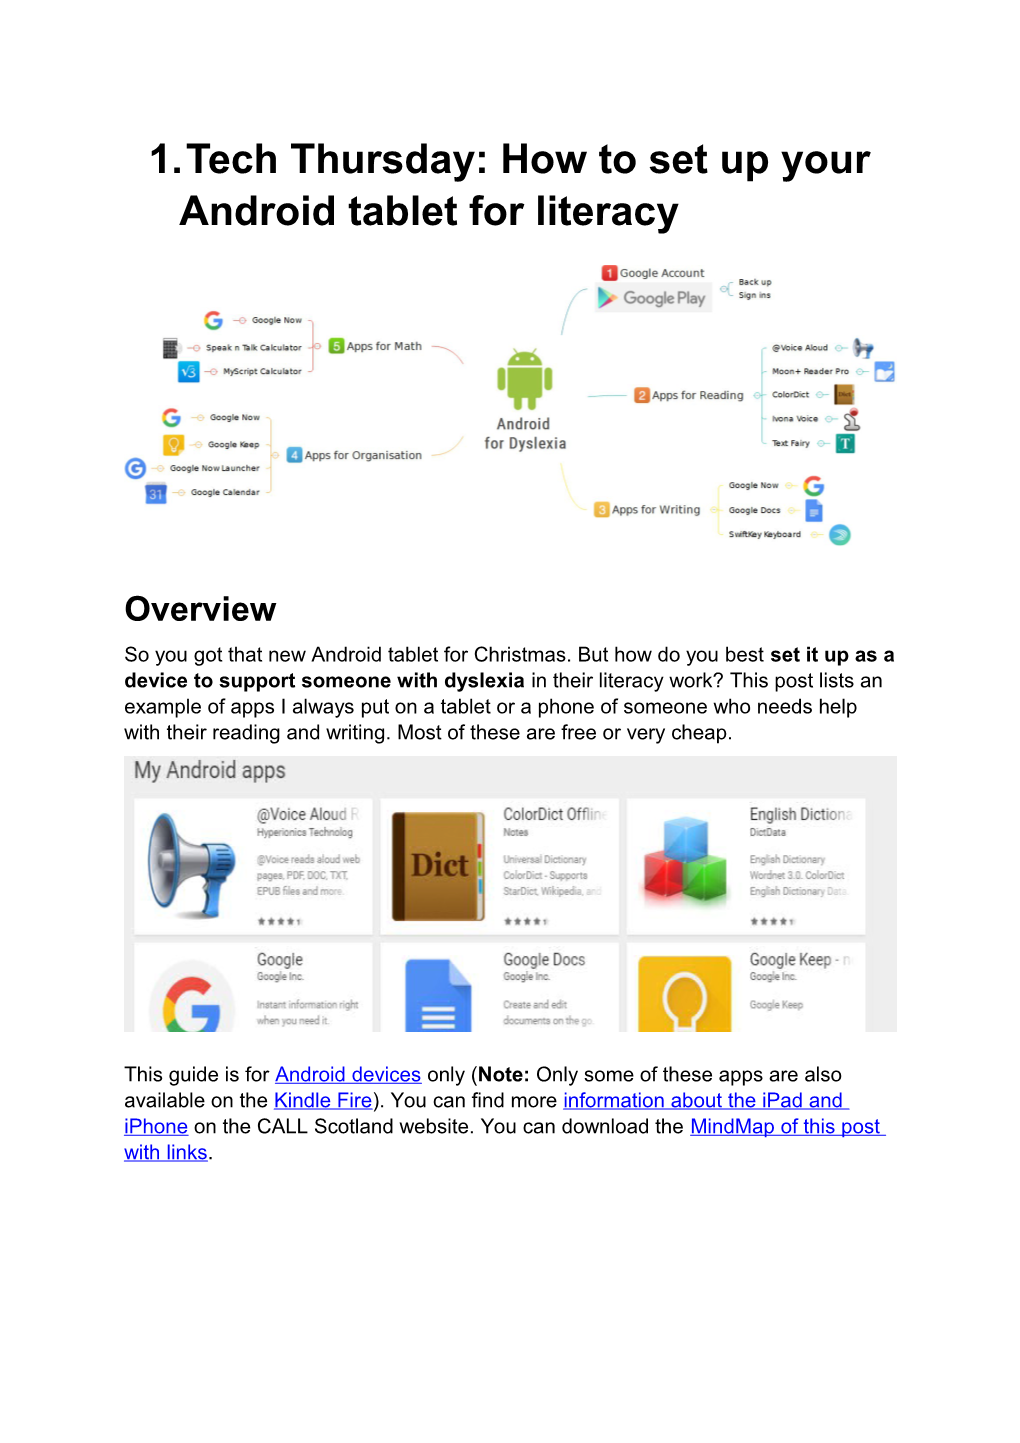 Tech Thursday: How to Set up Your Android Tablet for Literacy